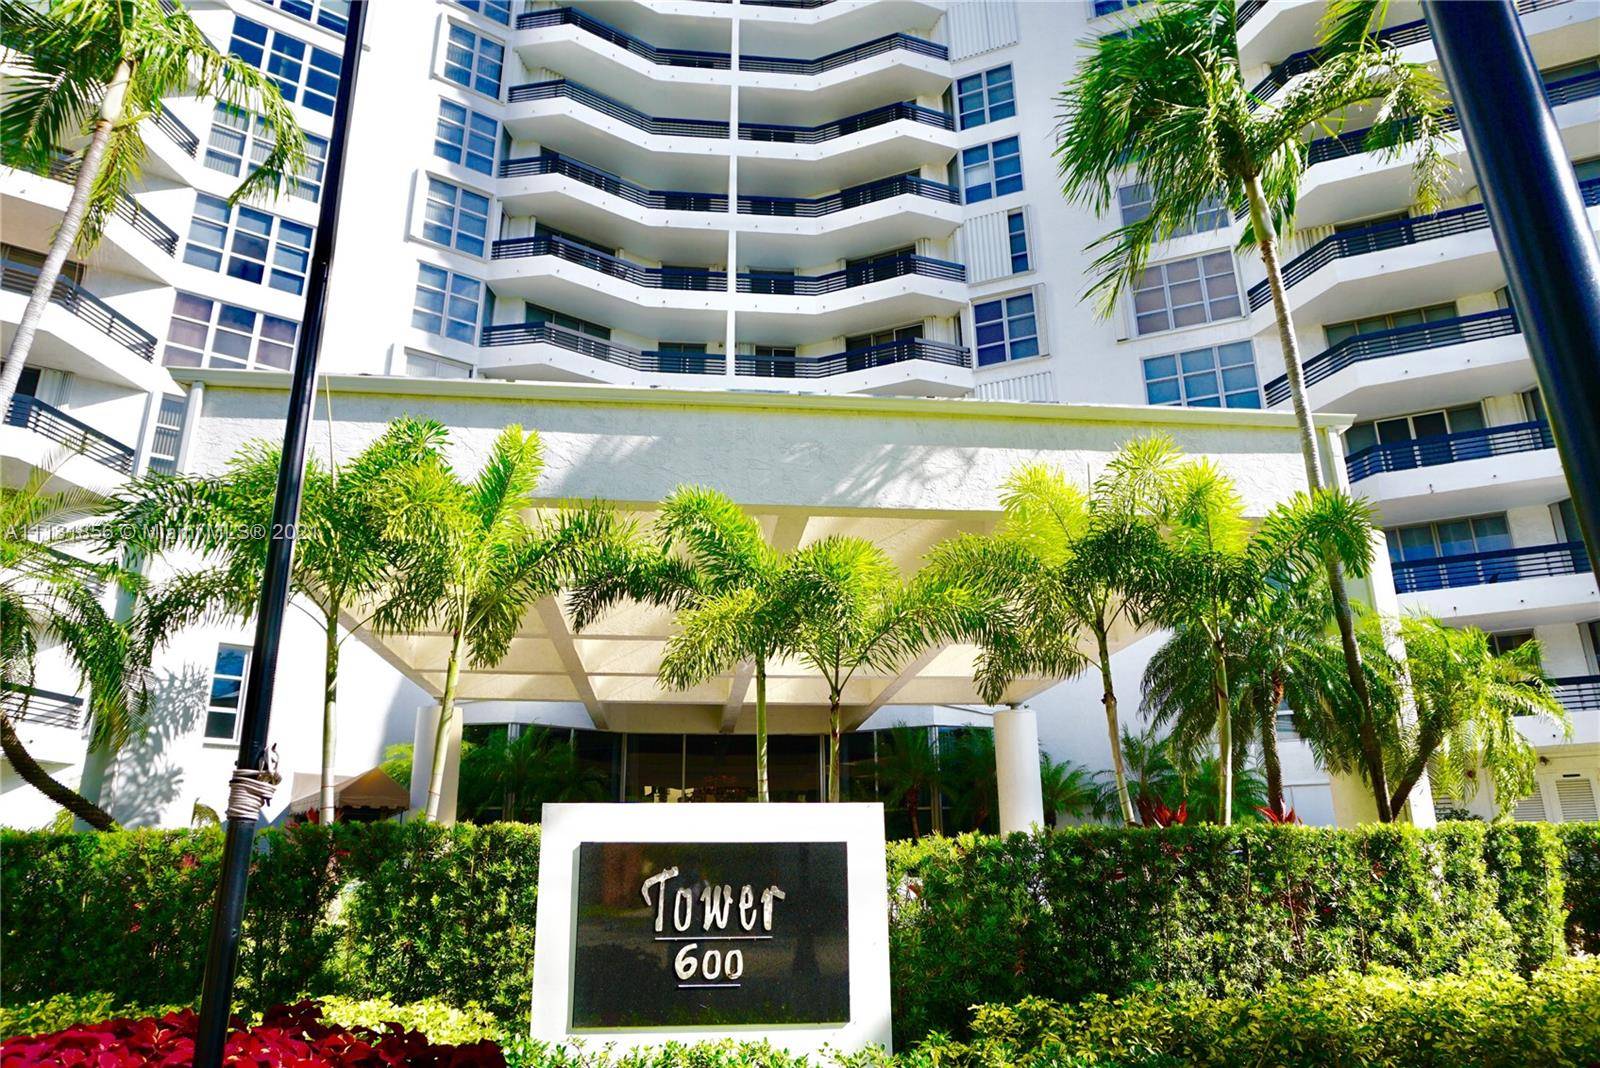 One of the best Bay view in Aventura Fl, Fantastic location, Close to Aventura Mall and Sunny Island Beach, easy access, gated community, concierge, private community pool and yacucci, Gym.